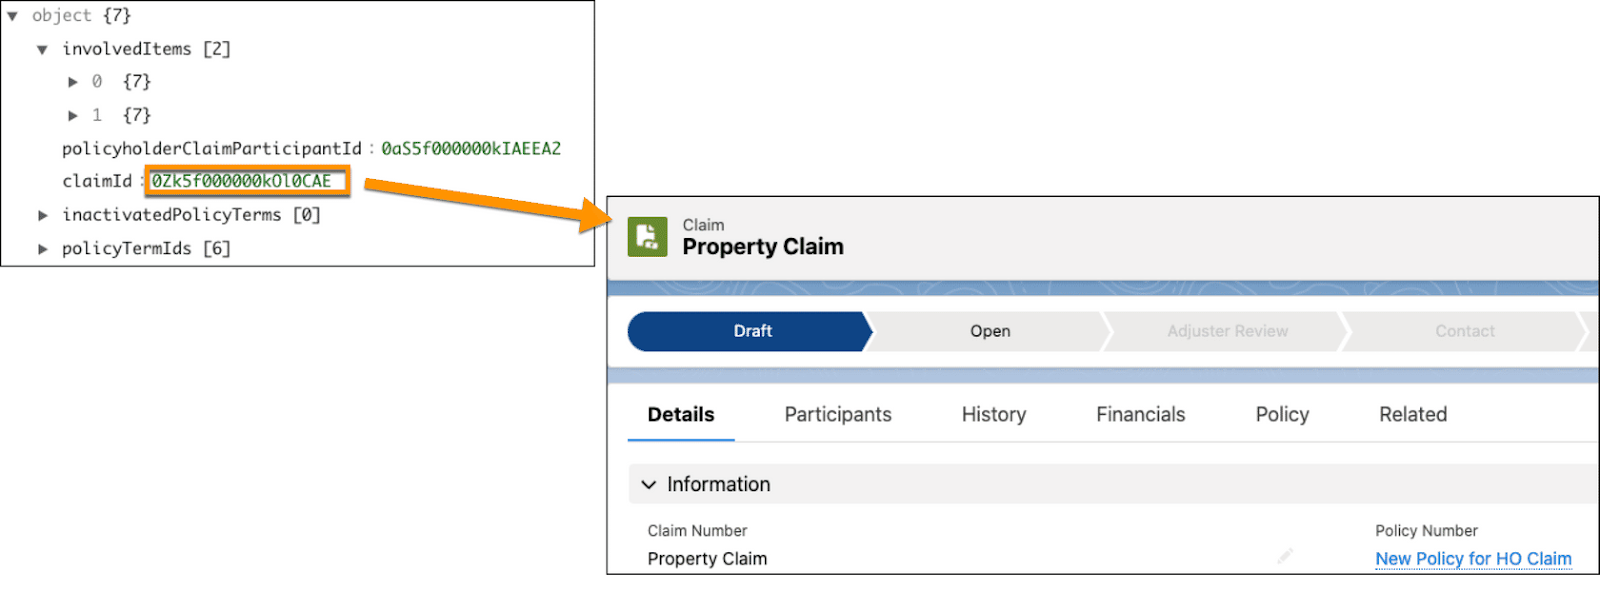 Arrow pointing from claimId to new Claim record for the property claim.